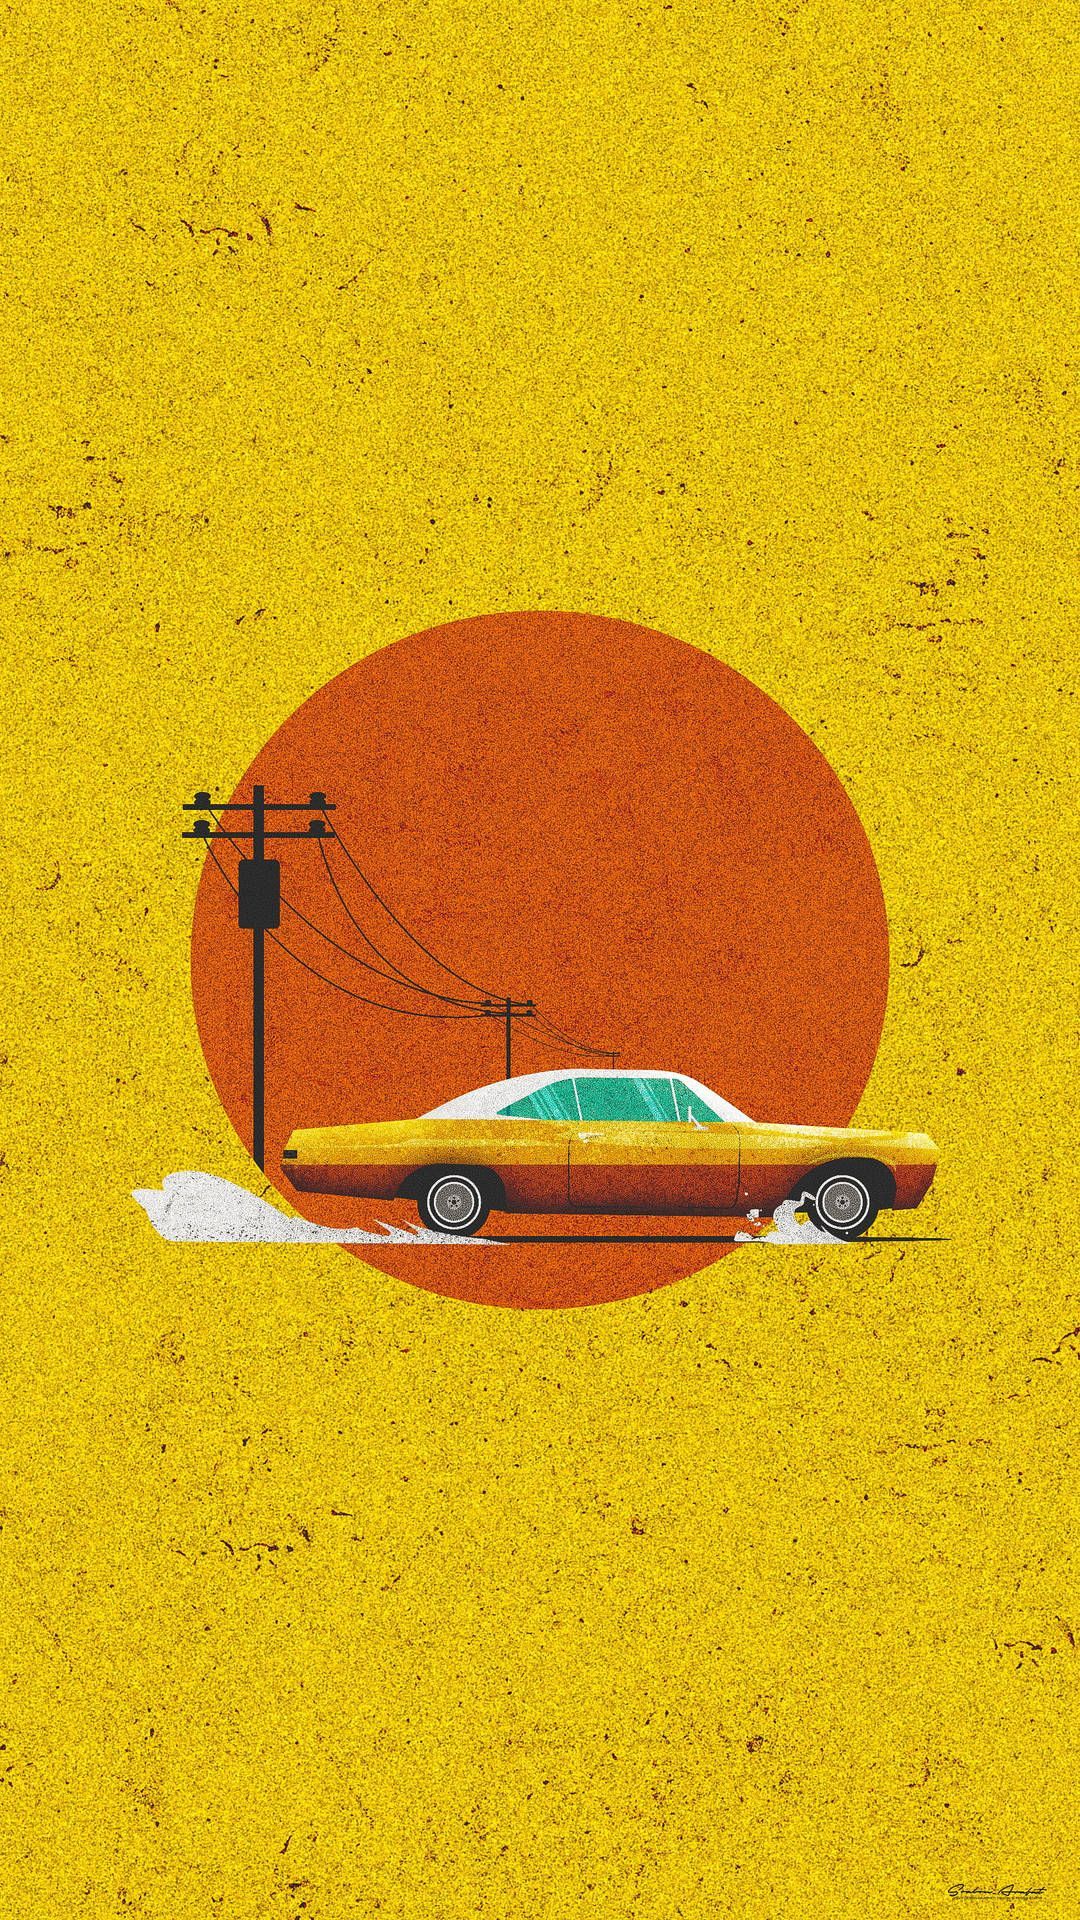 Minimalist poster of a car in front of a sunset - Vintage, 90s, retro